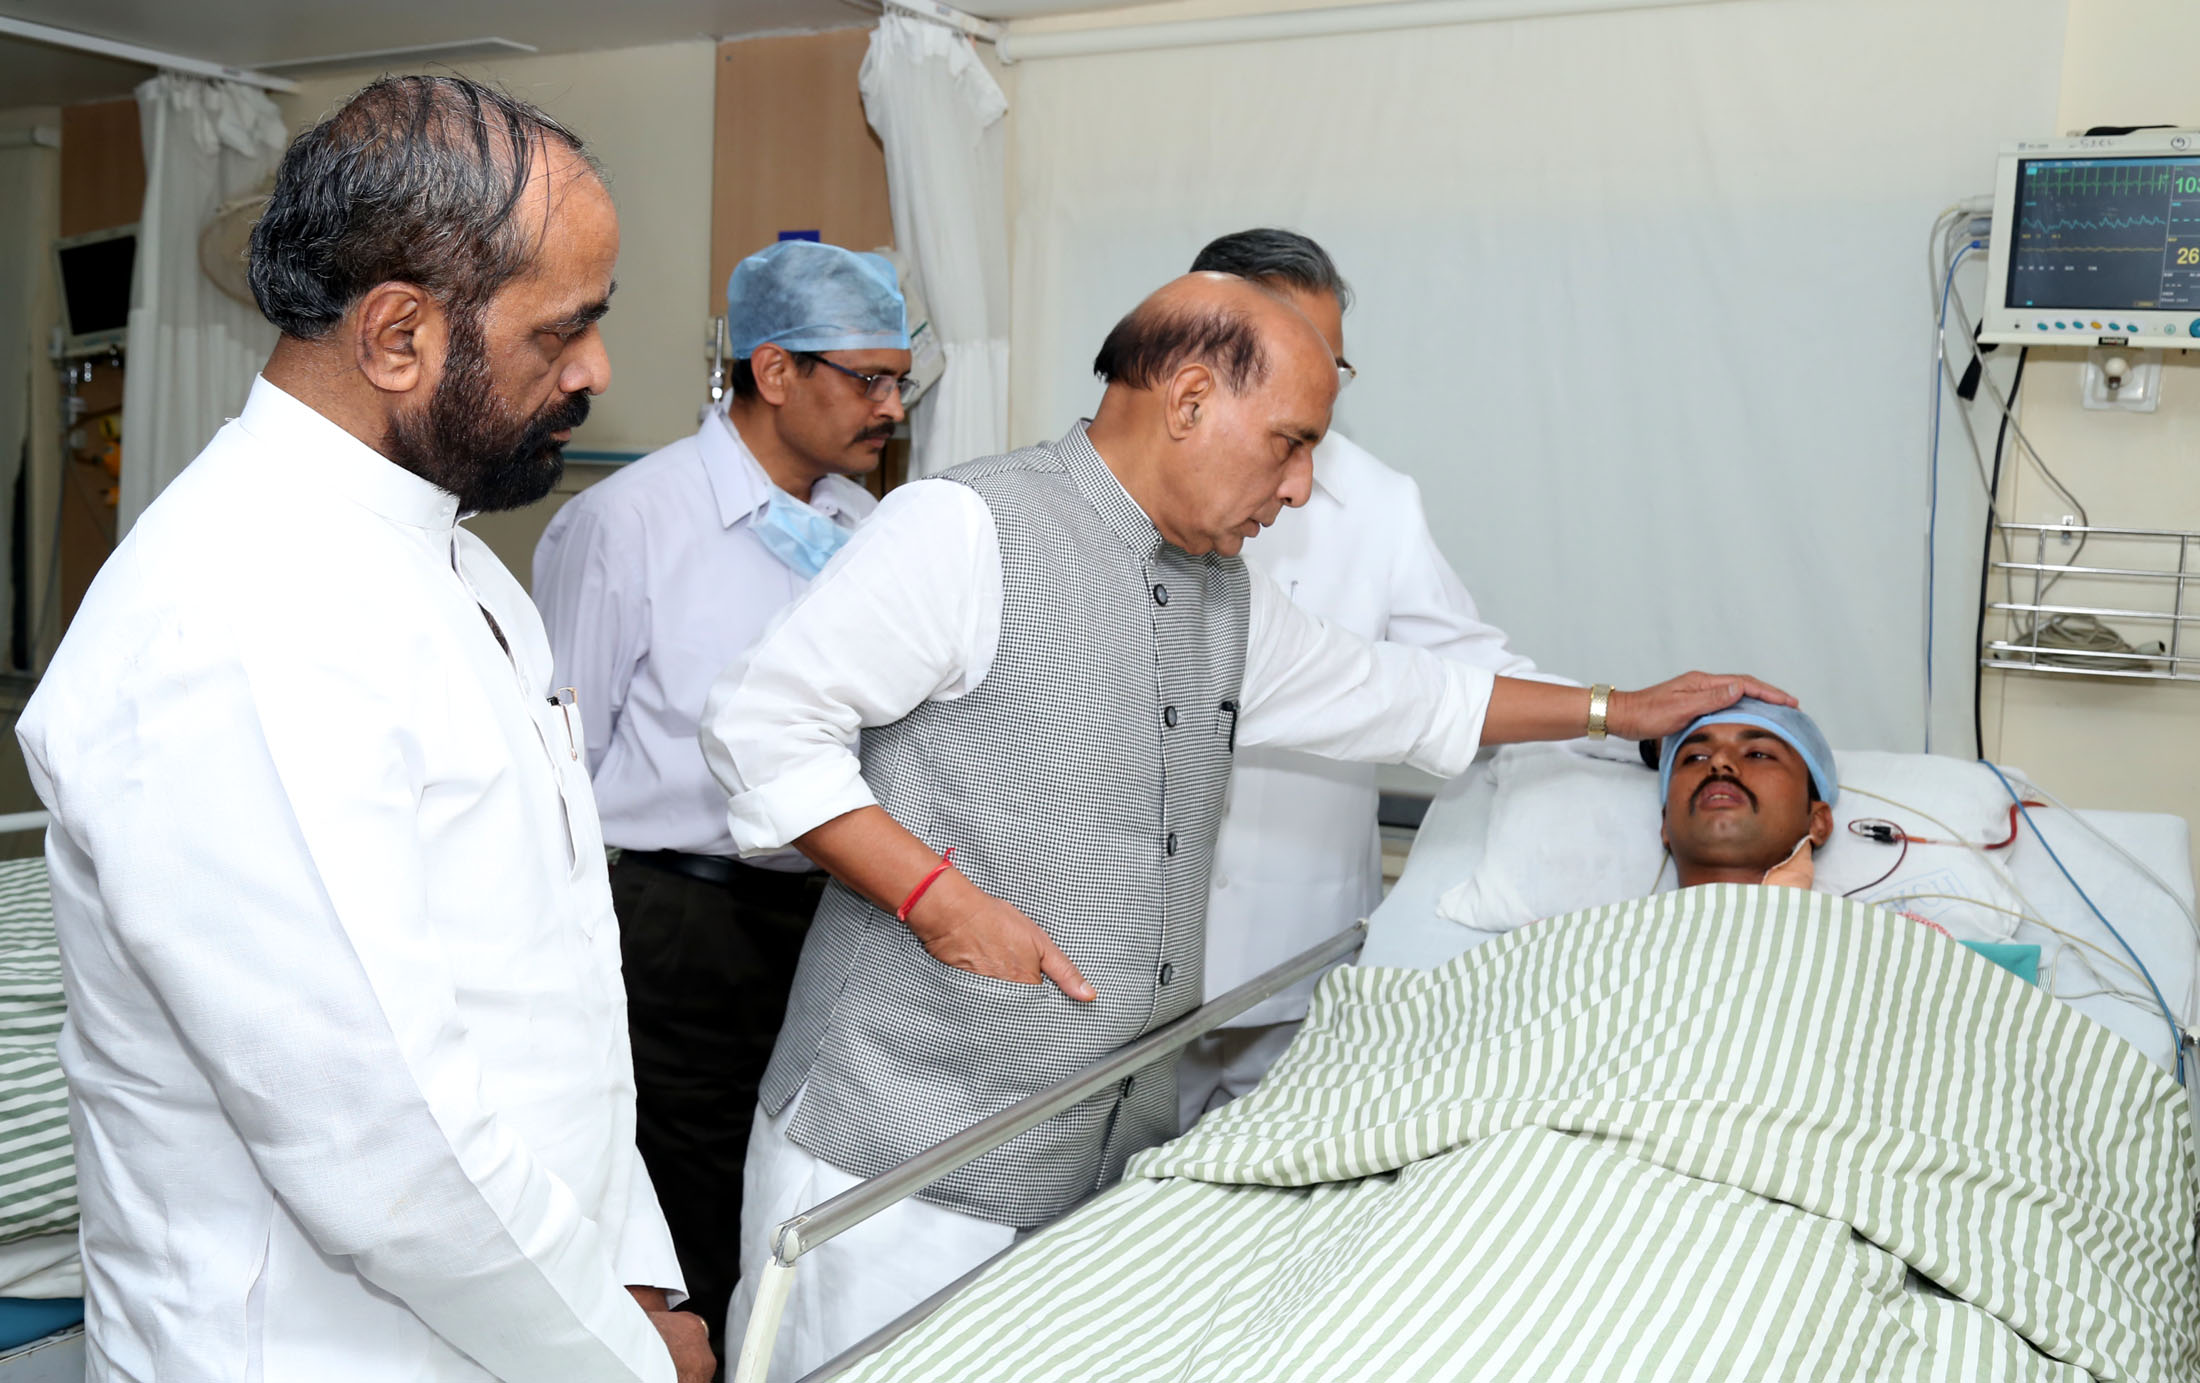 The Union Home Minister, Shri Rajnath Singh enquiring about the health of injured CRPF personnel at the Ramkrishna Care Hospital, in Raipur, Chhattisgarh on April 25, 2017. The Minister of State for Home Affairs, Shri Hansraj Gangaram Ahir is also seen.